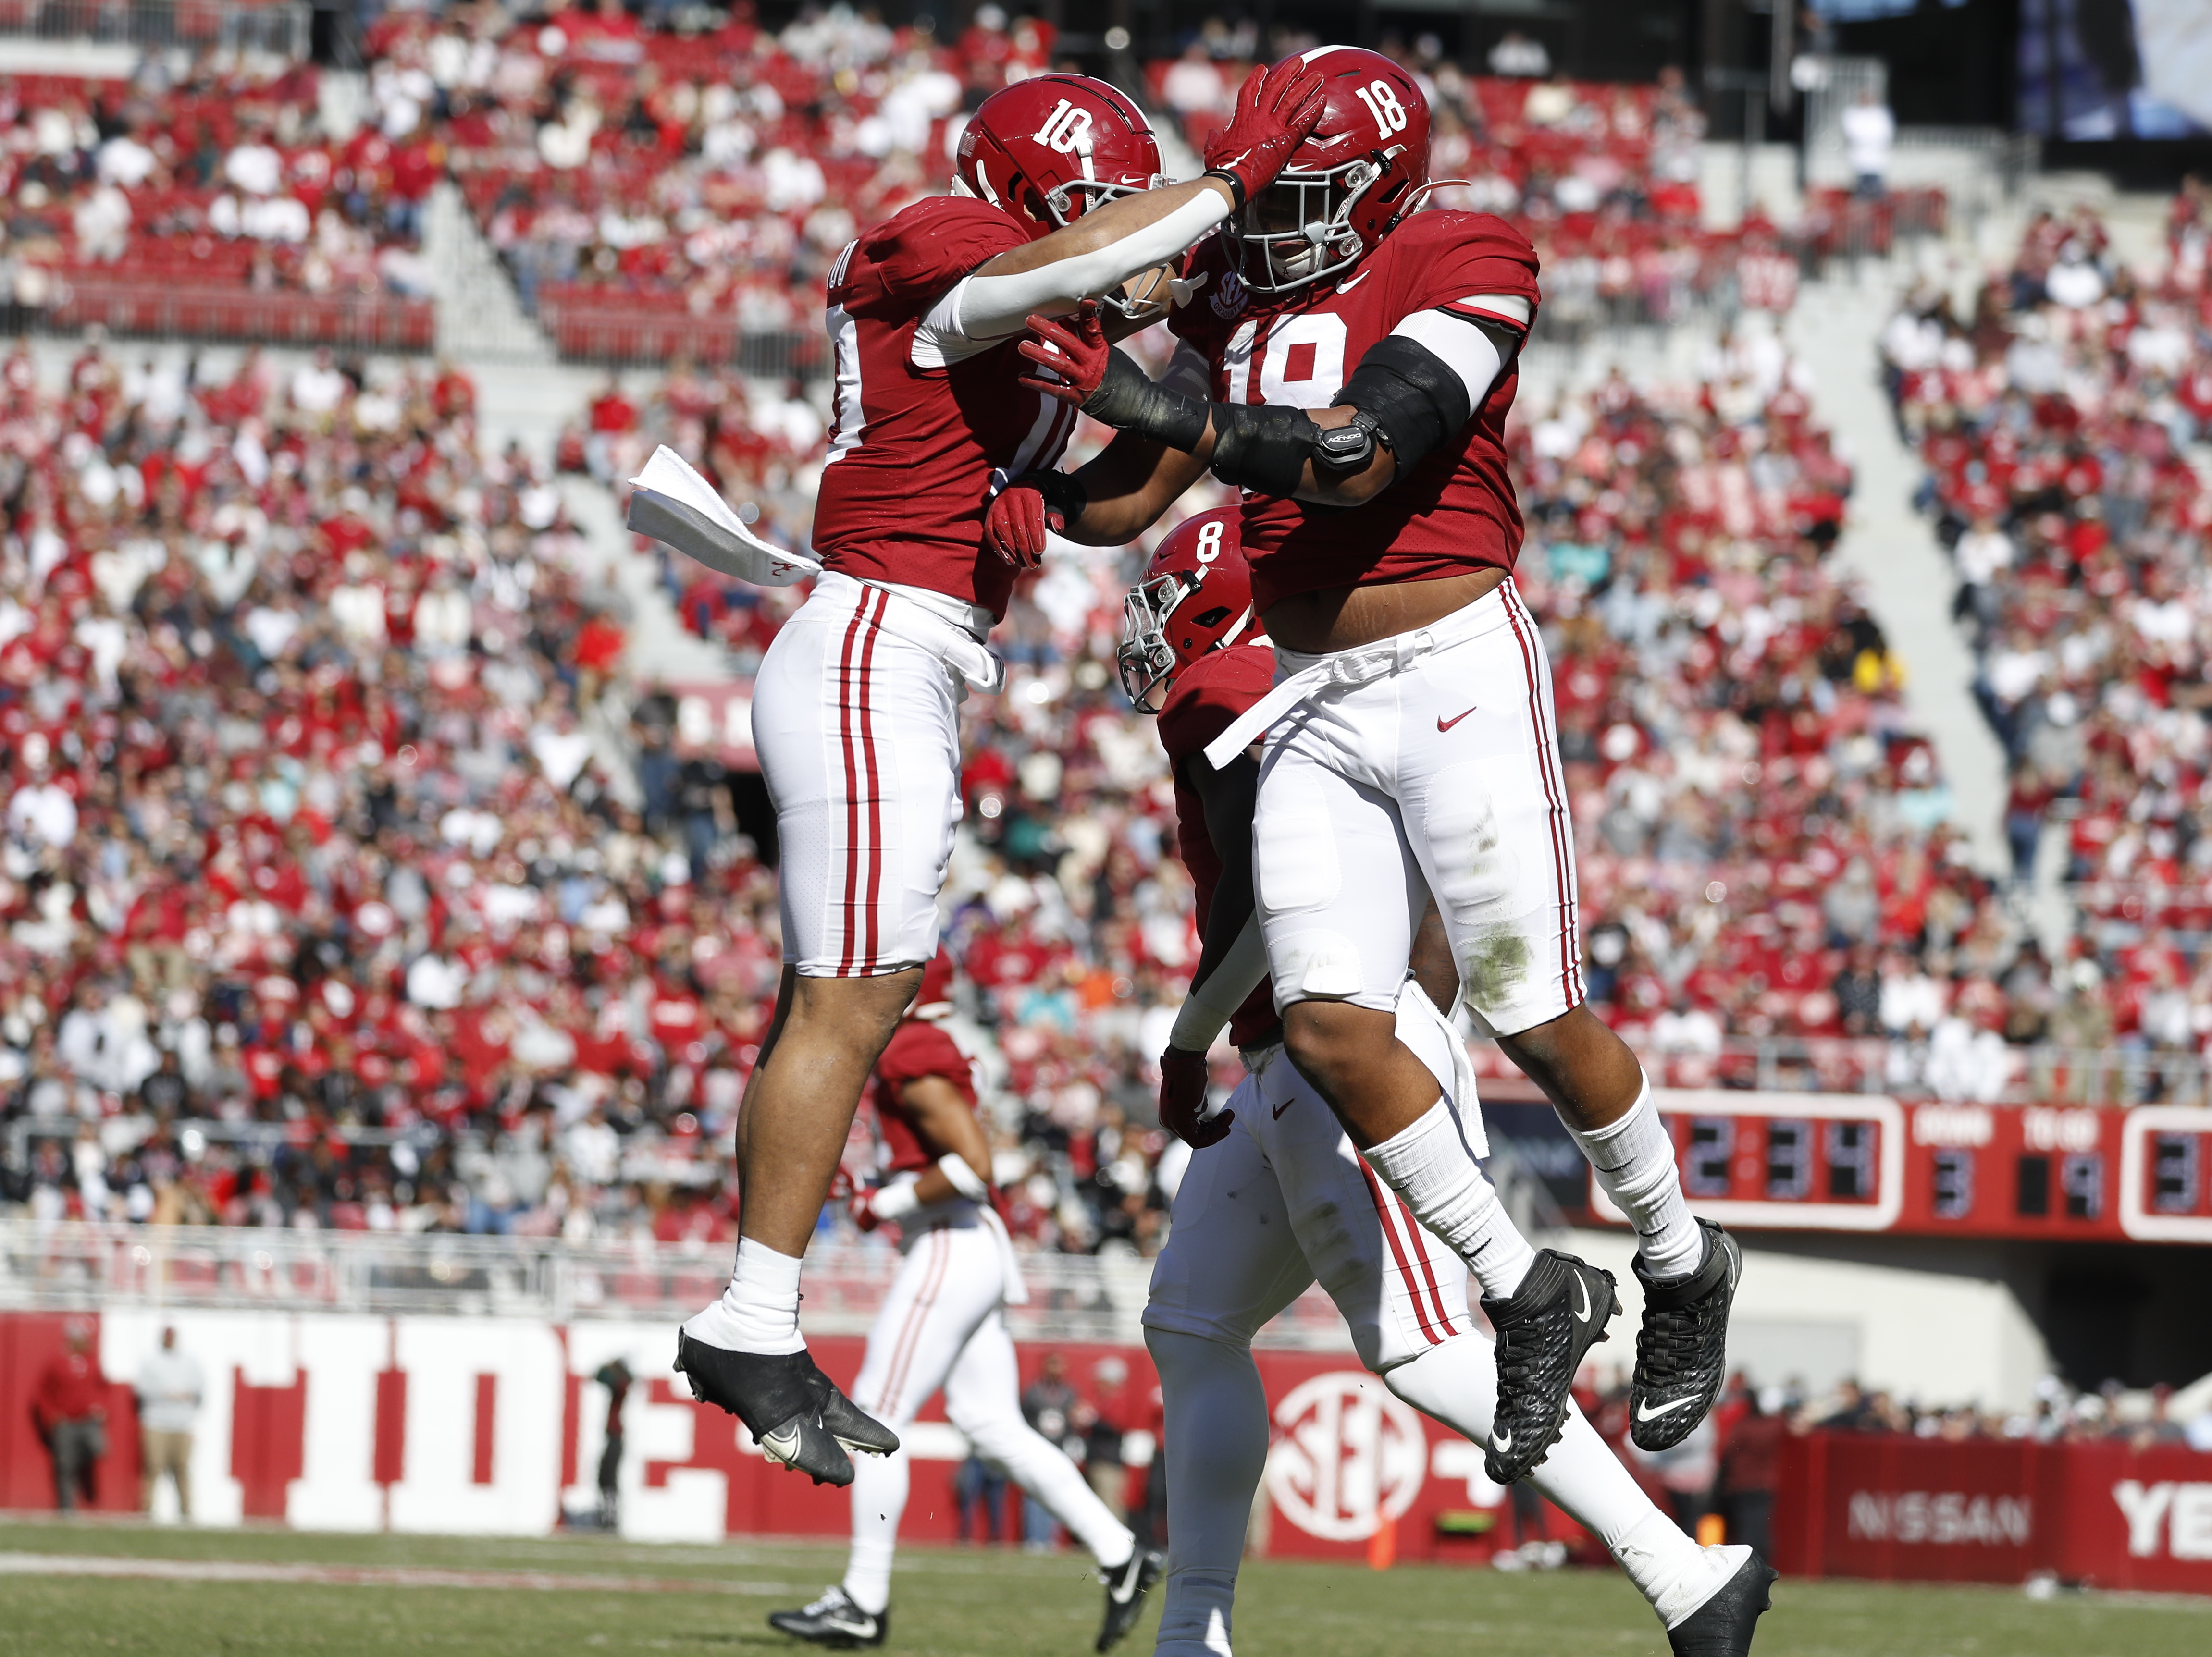 Alabama Crimson Tide: 13 is the Tide's lucky number